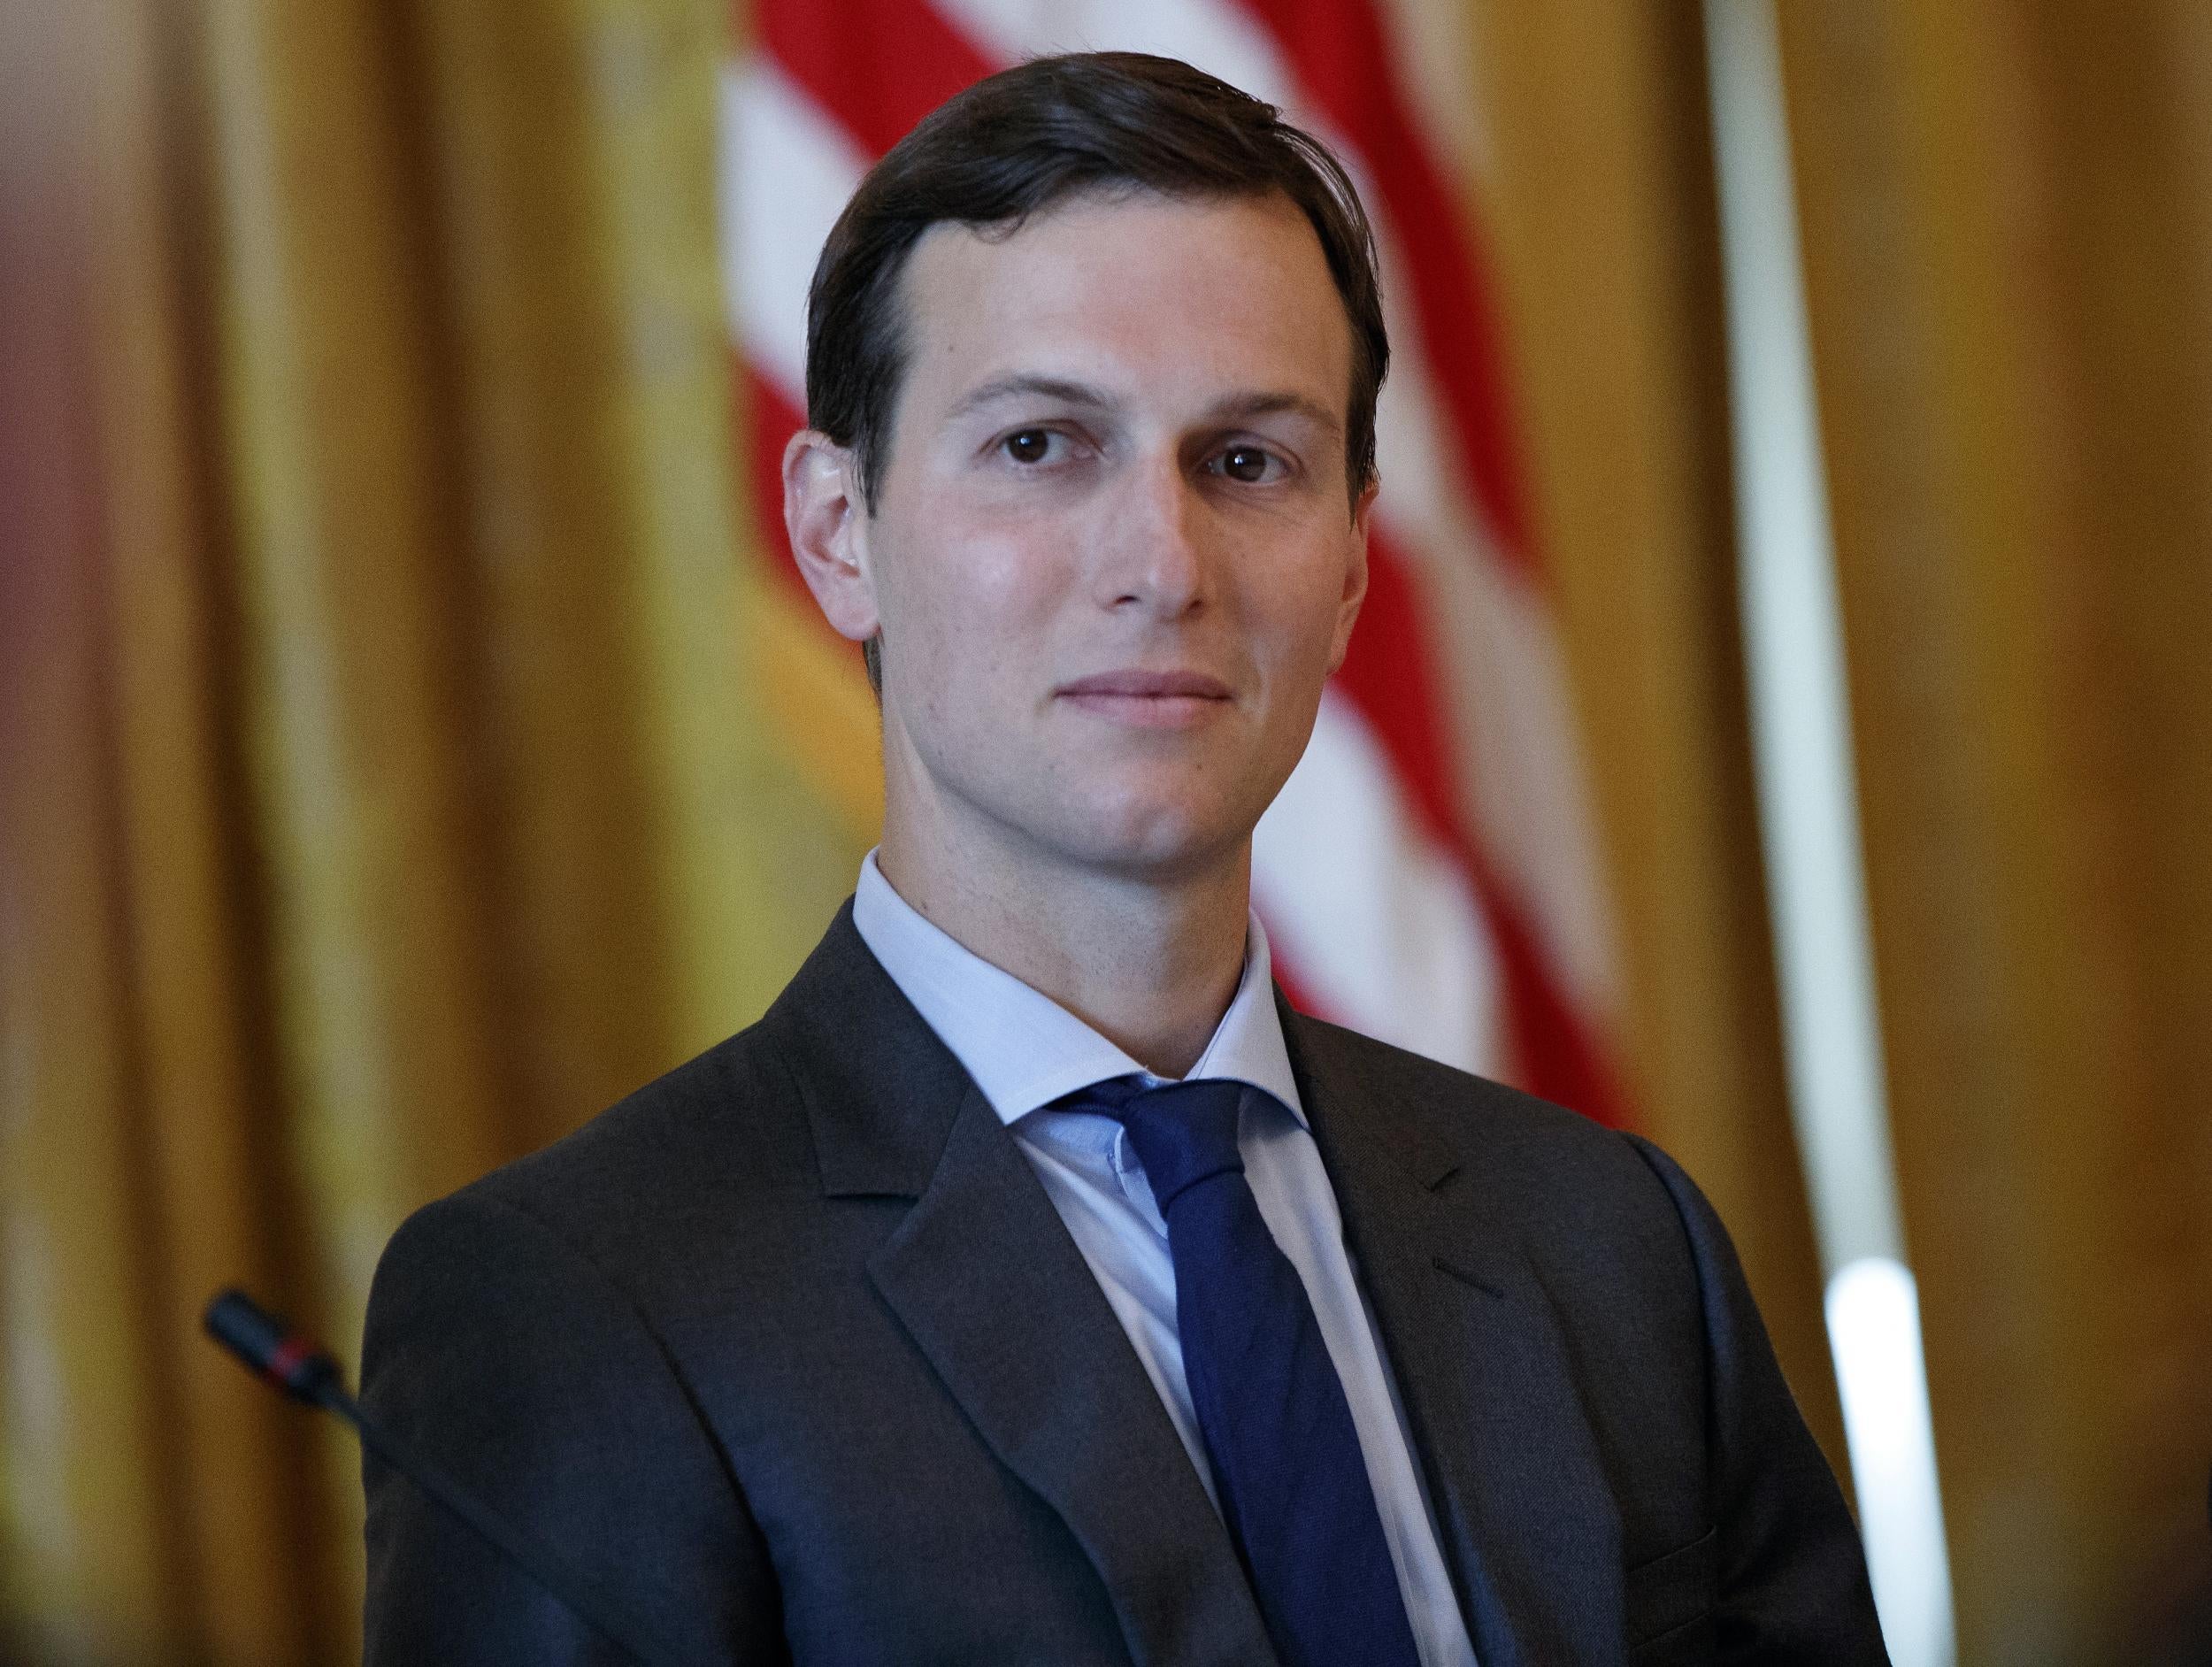 Jared Kushner has previously denied collusion with 'any foreign government'